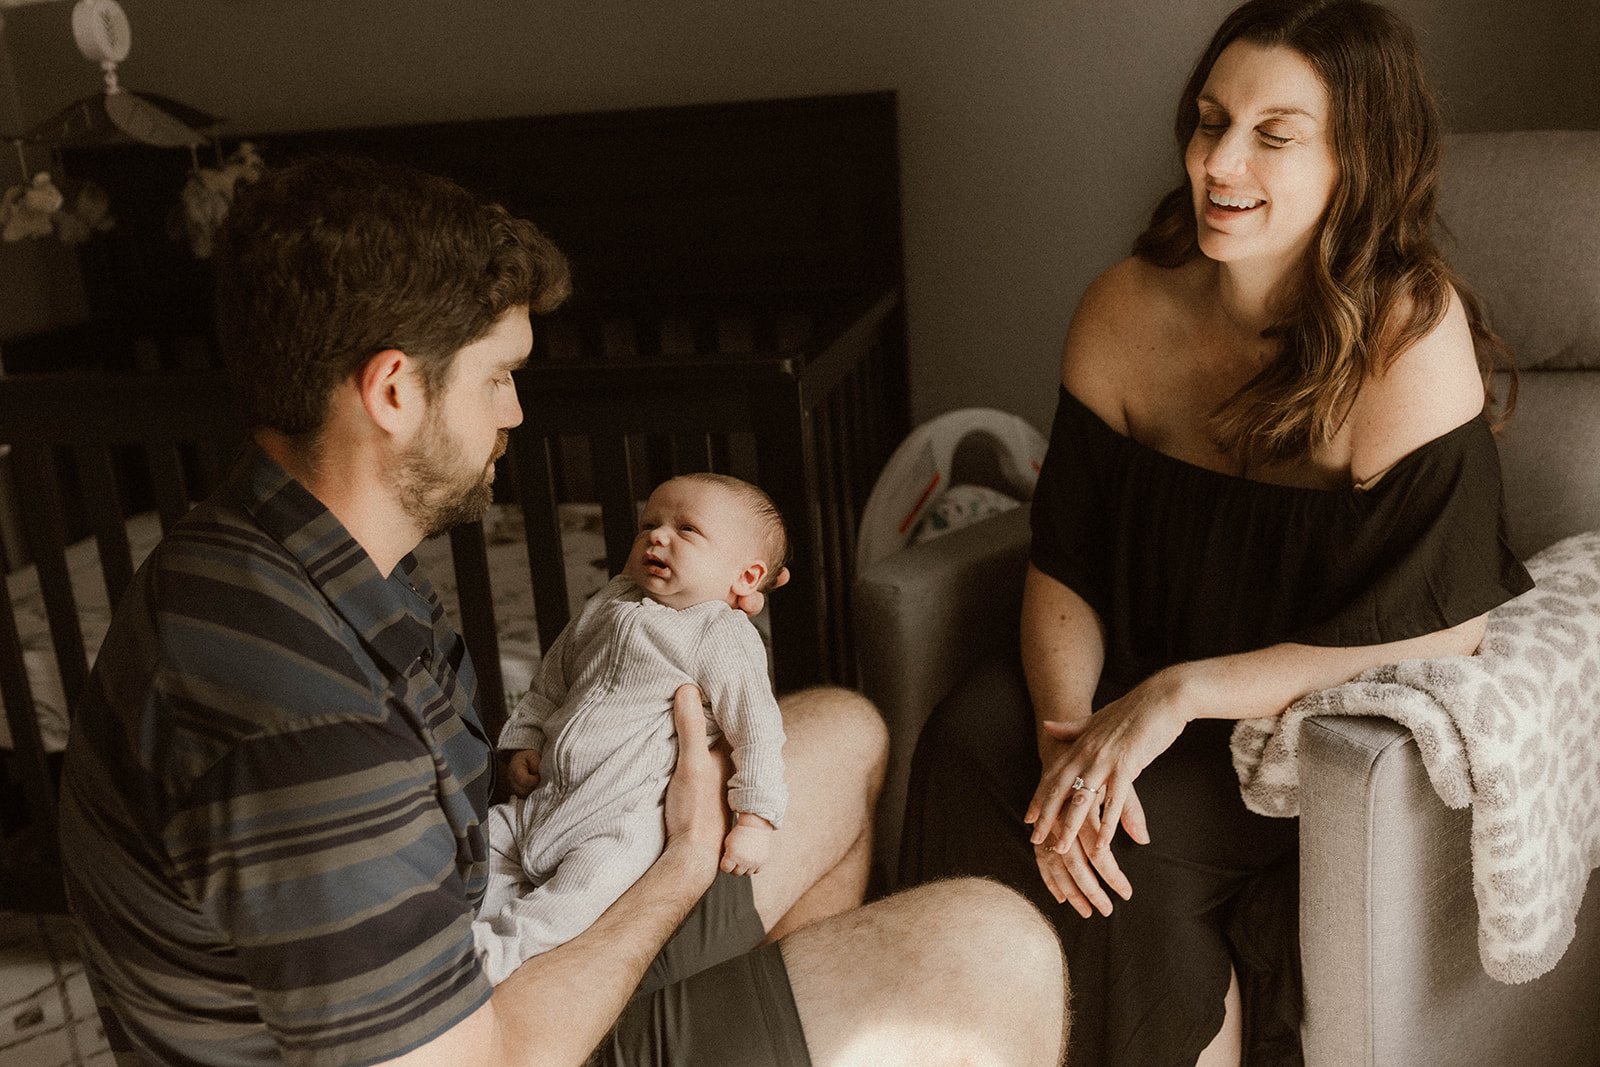 A beautiful new family pose together during their in home newborn photography session